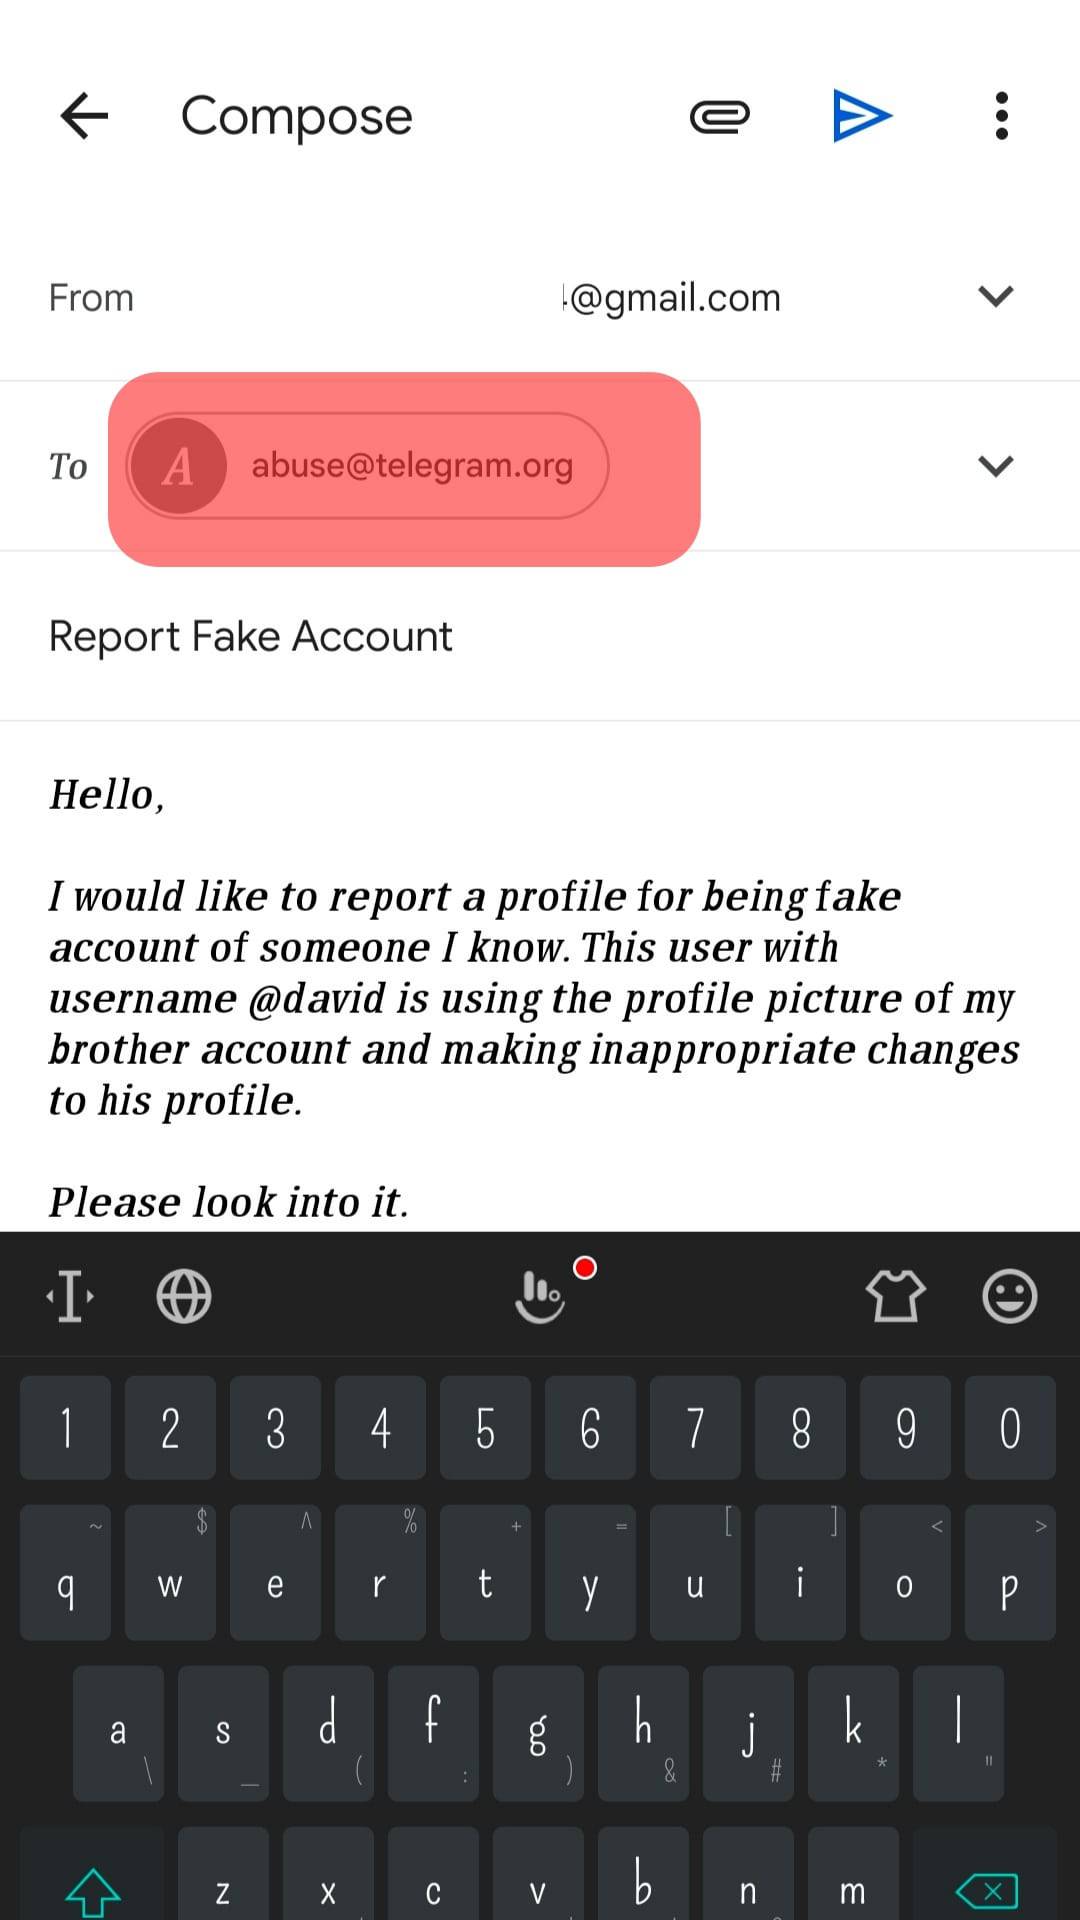 Compose An Email To Abuse@Telegram.org